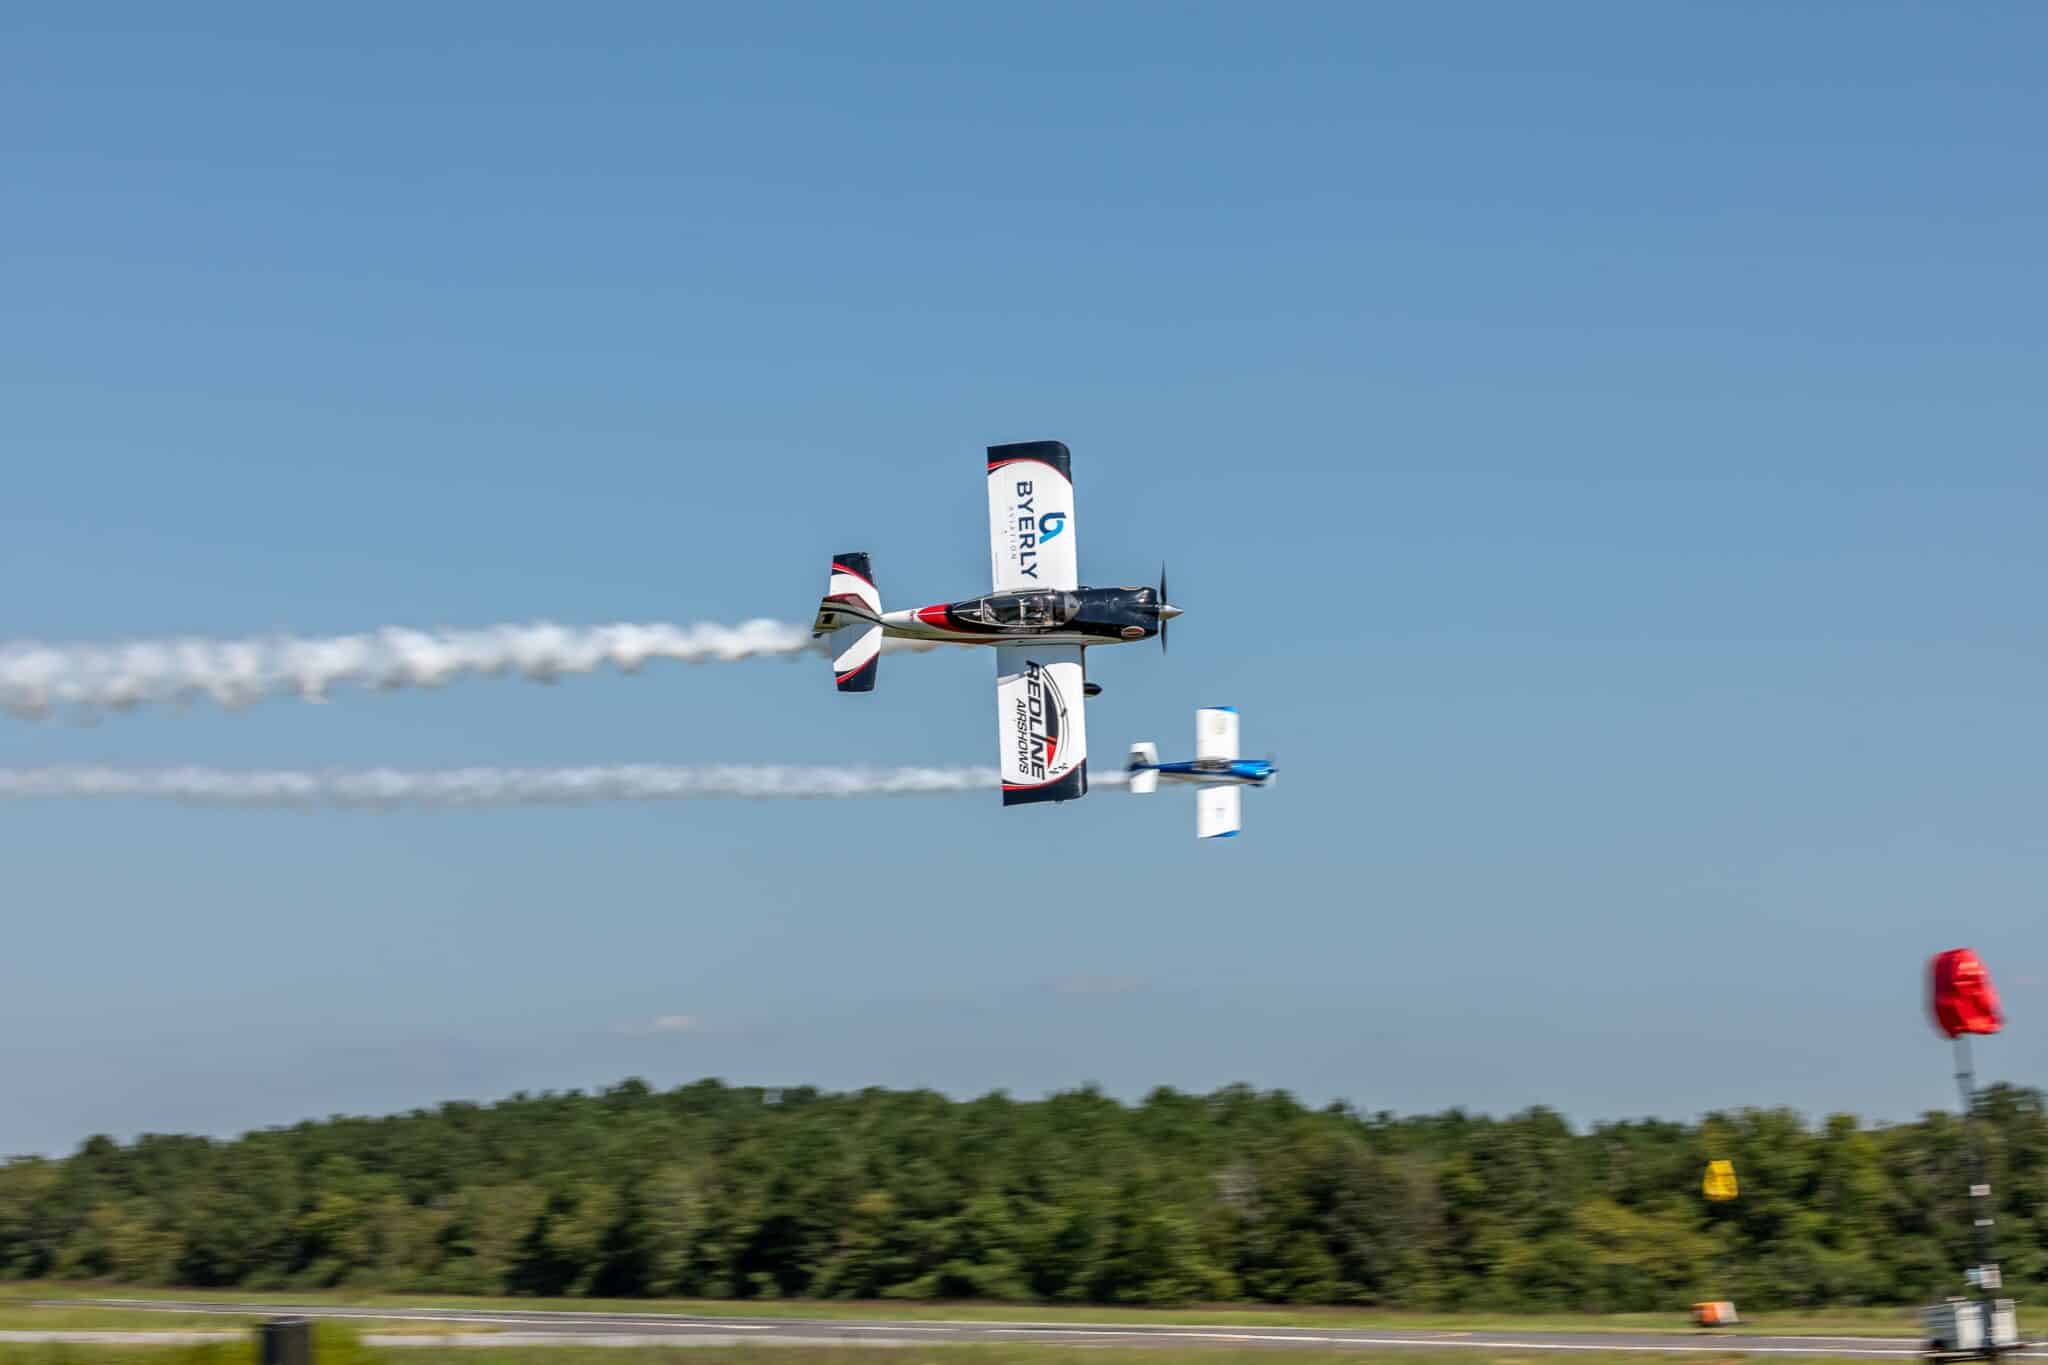 Don't miss the Wings over North Georgia 10th anniversary air show